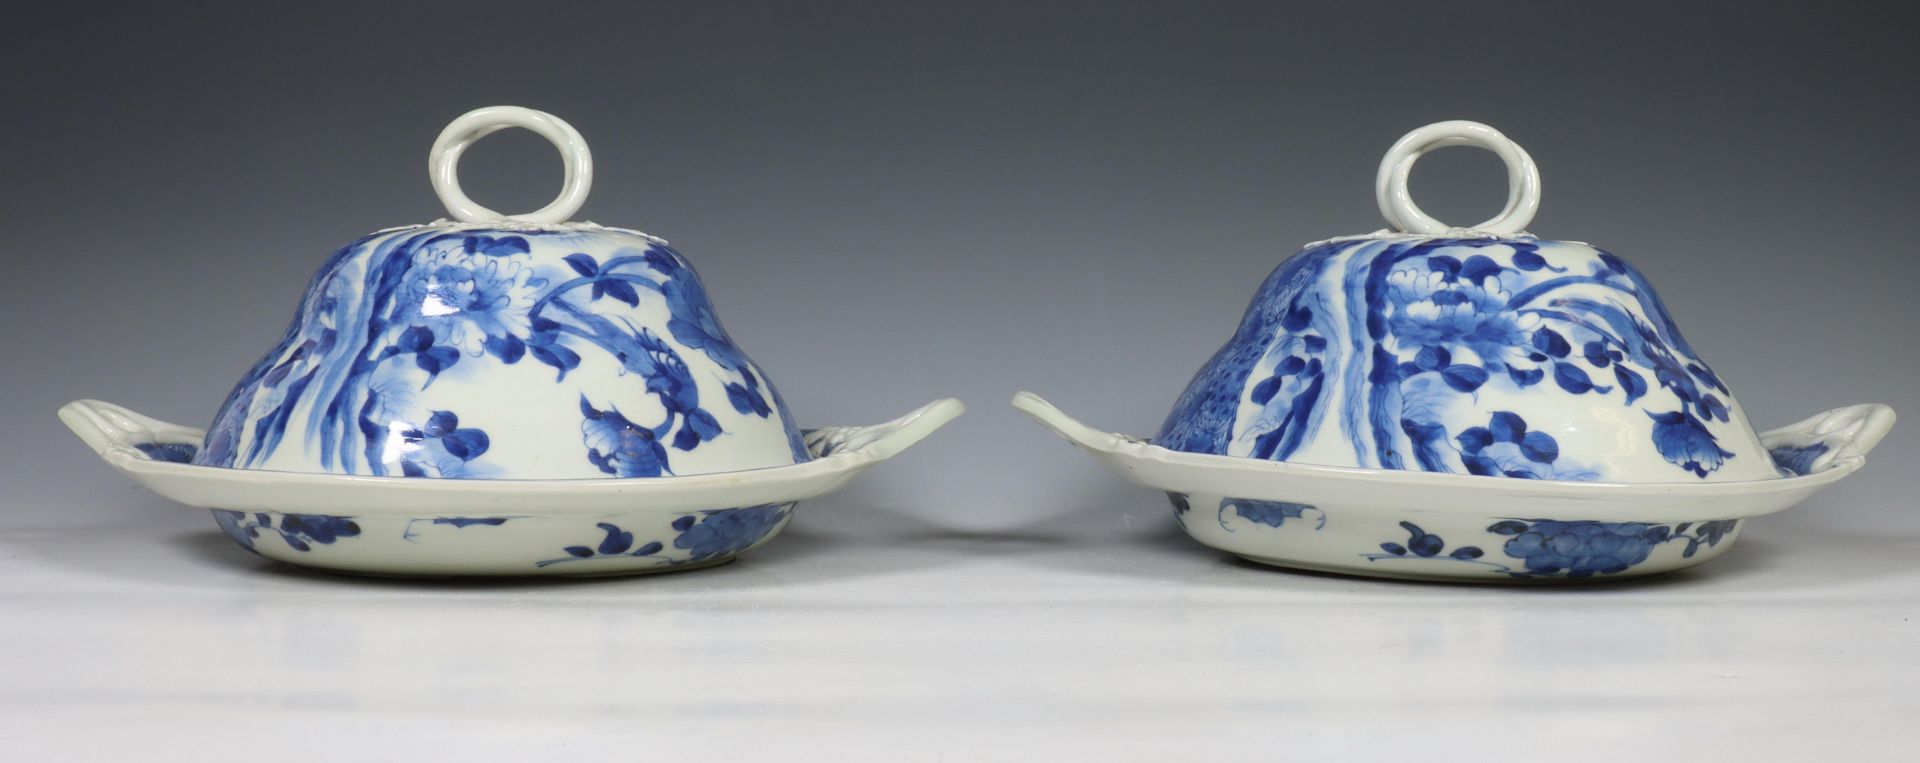 Japan, pair of Arita blue and white porcelain serving dishes and covers, 19th century, decorated - Image 12 of 12